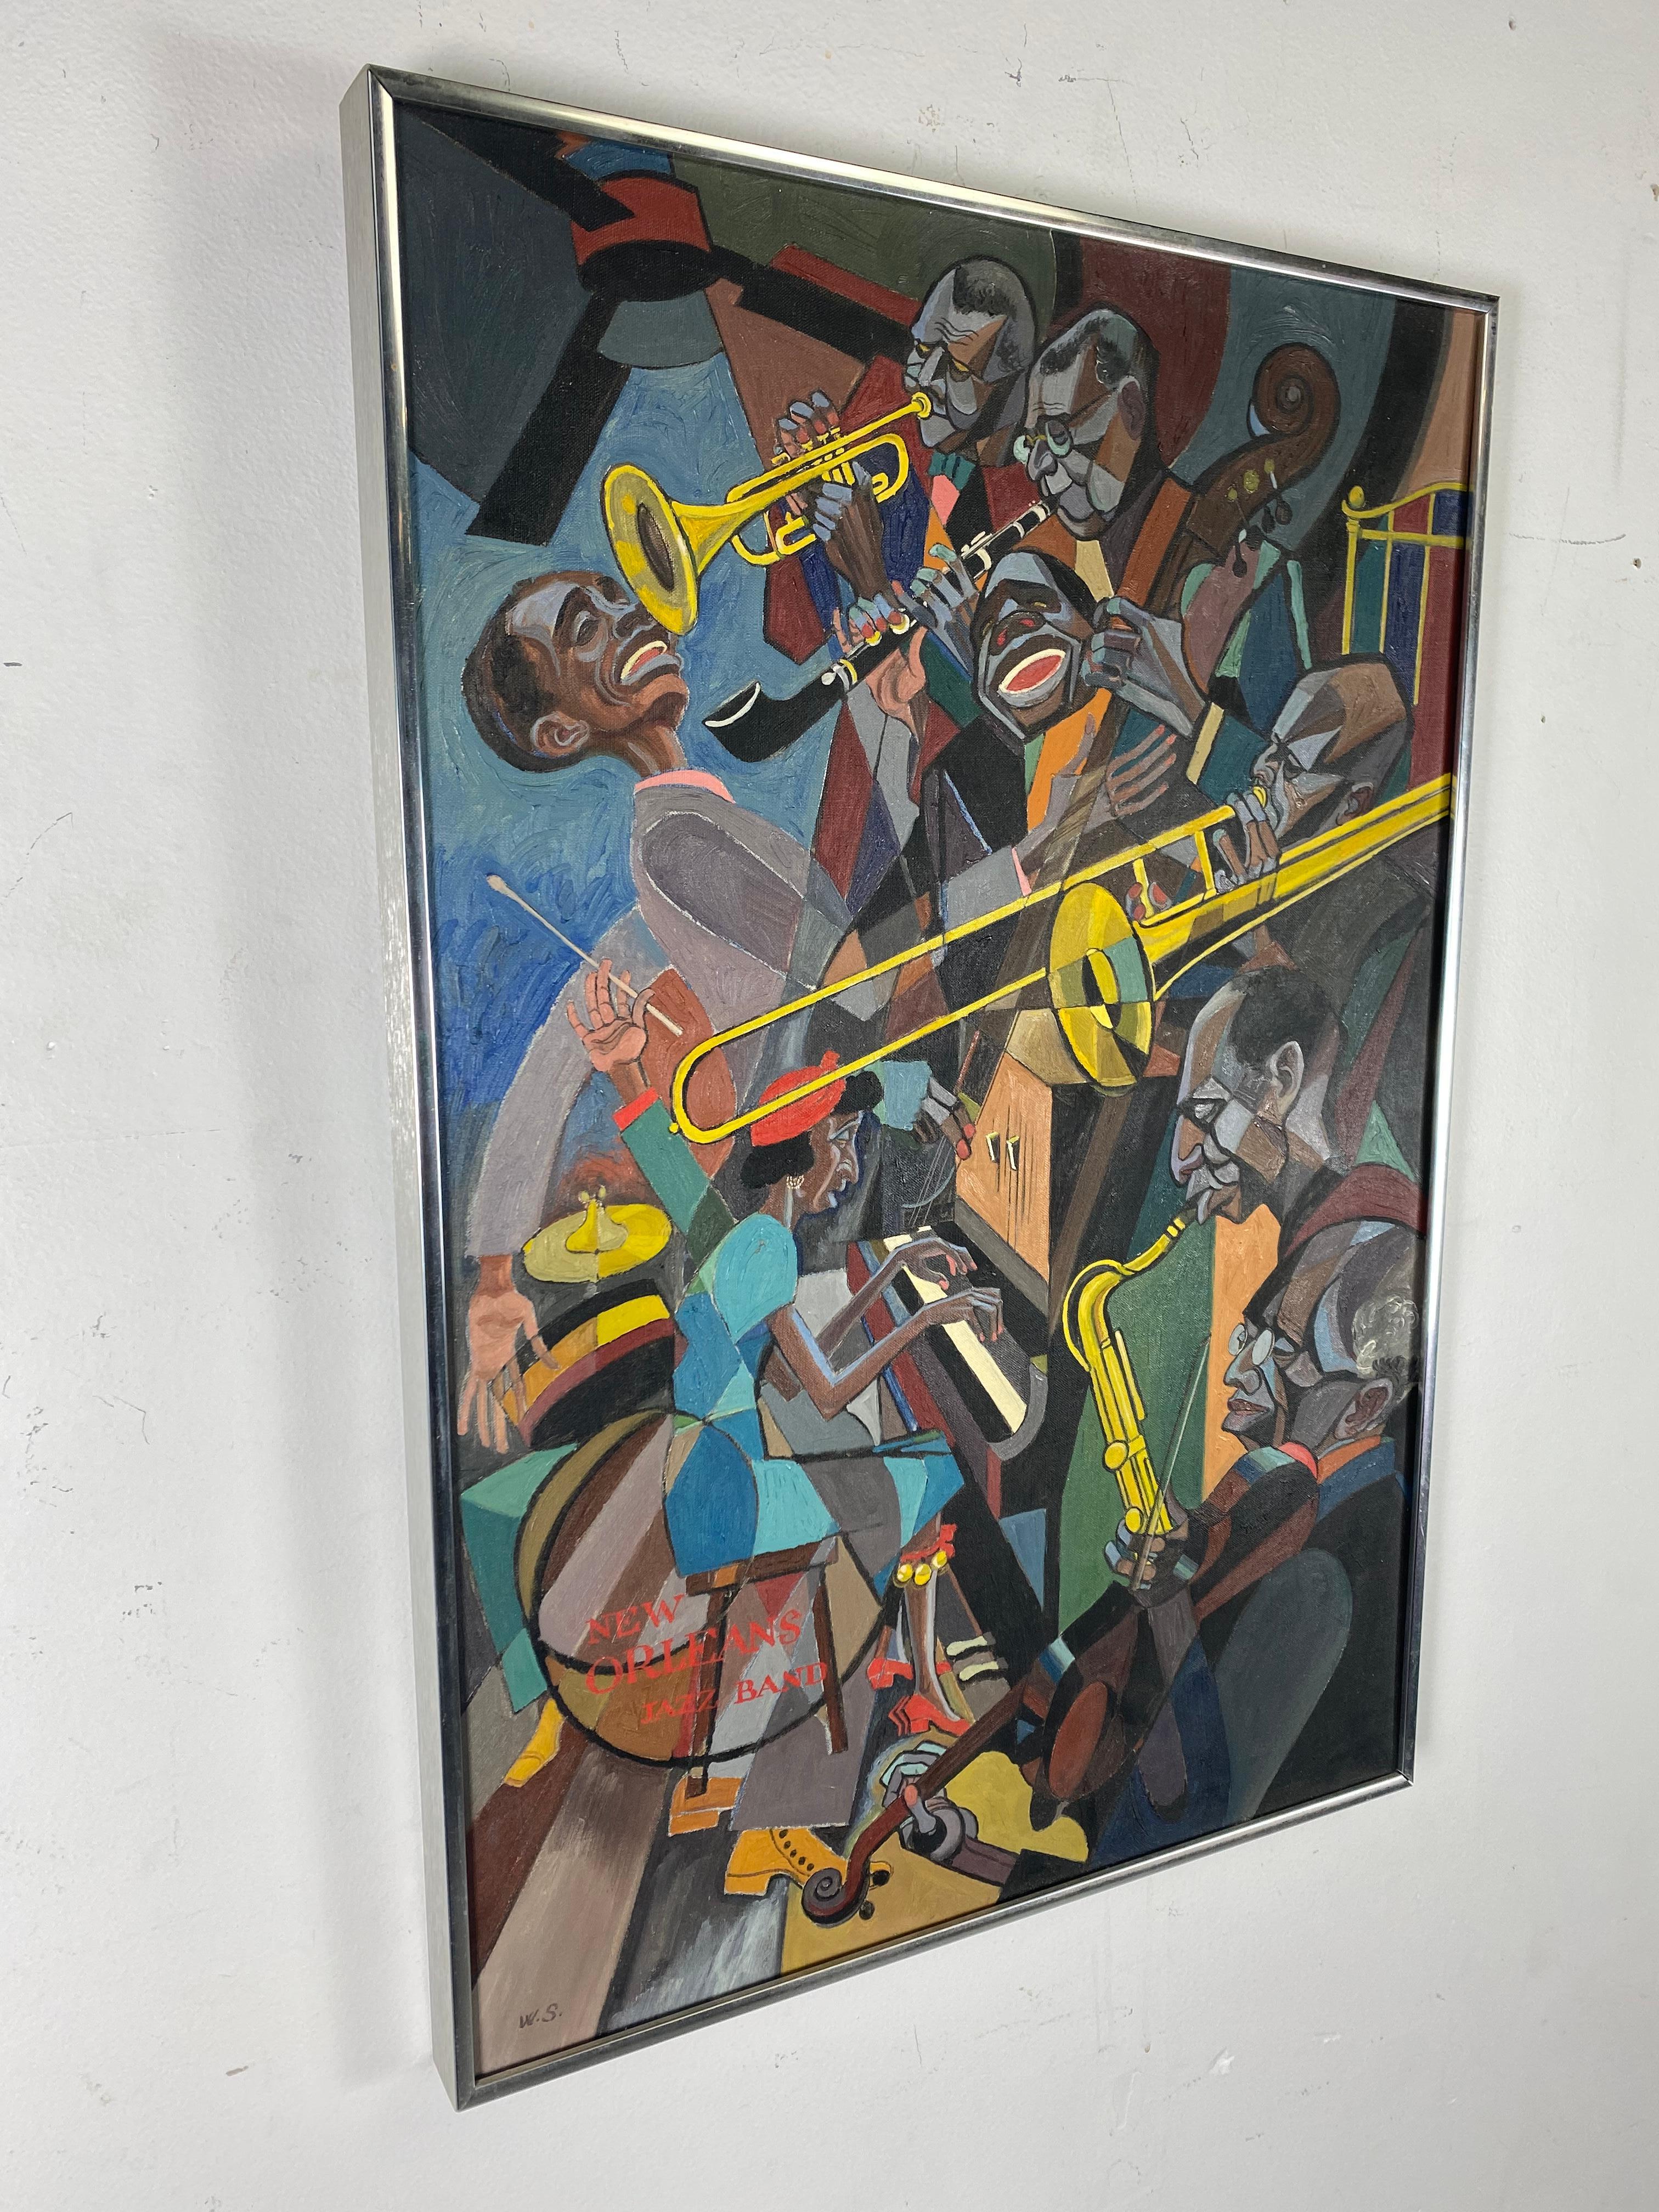 Hand-Painted Large Abstract Modernist Cubist Jazz Painting, Oil on Canvas by William Sharp